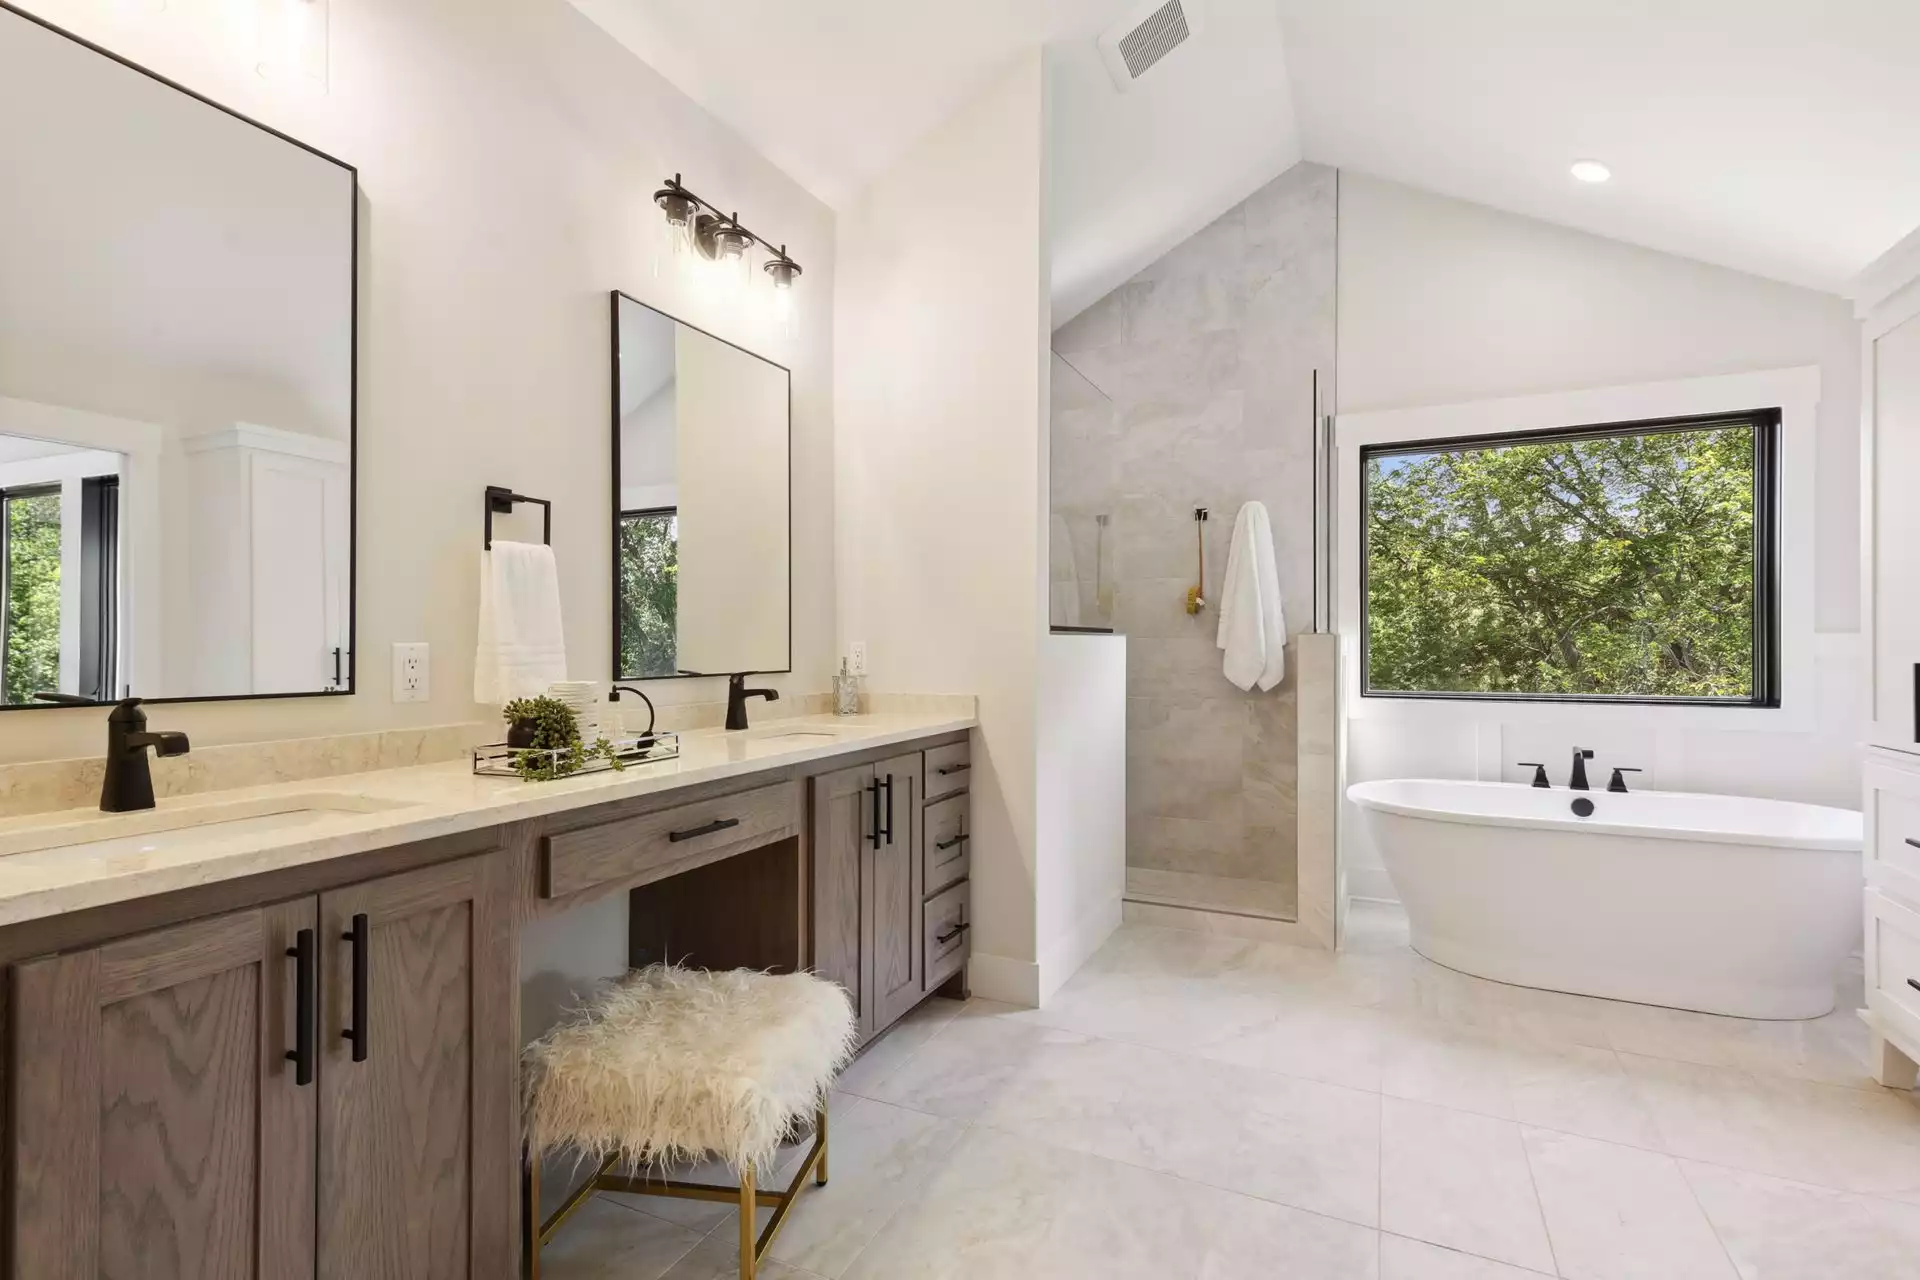 Owner’s suite bathroom features free standing soaking tub with a view